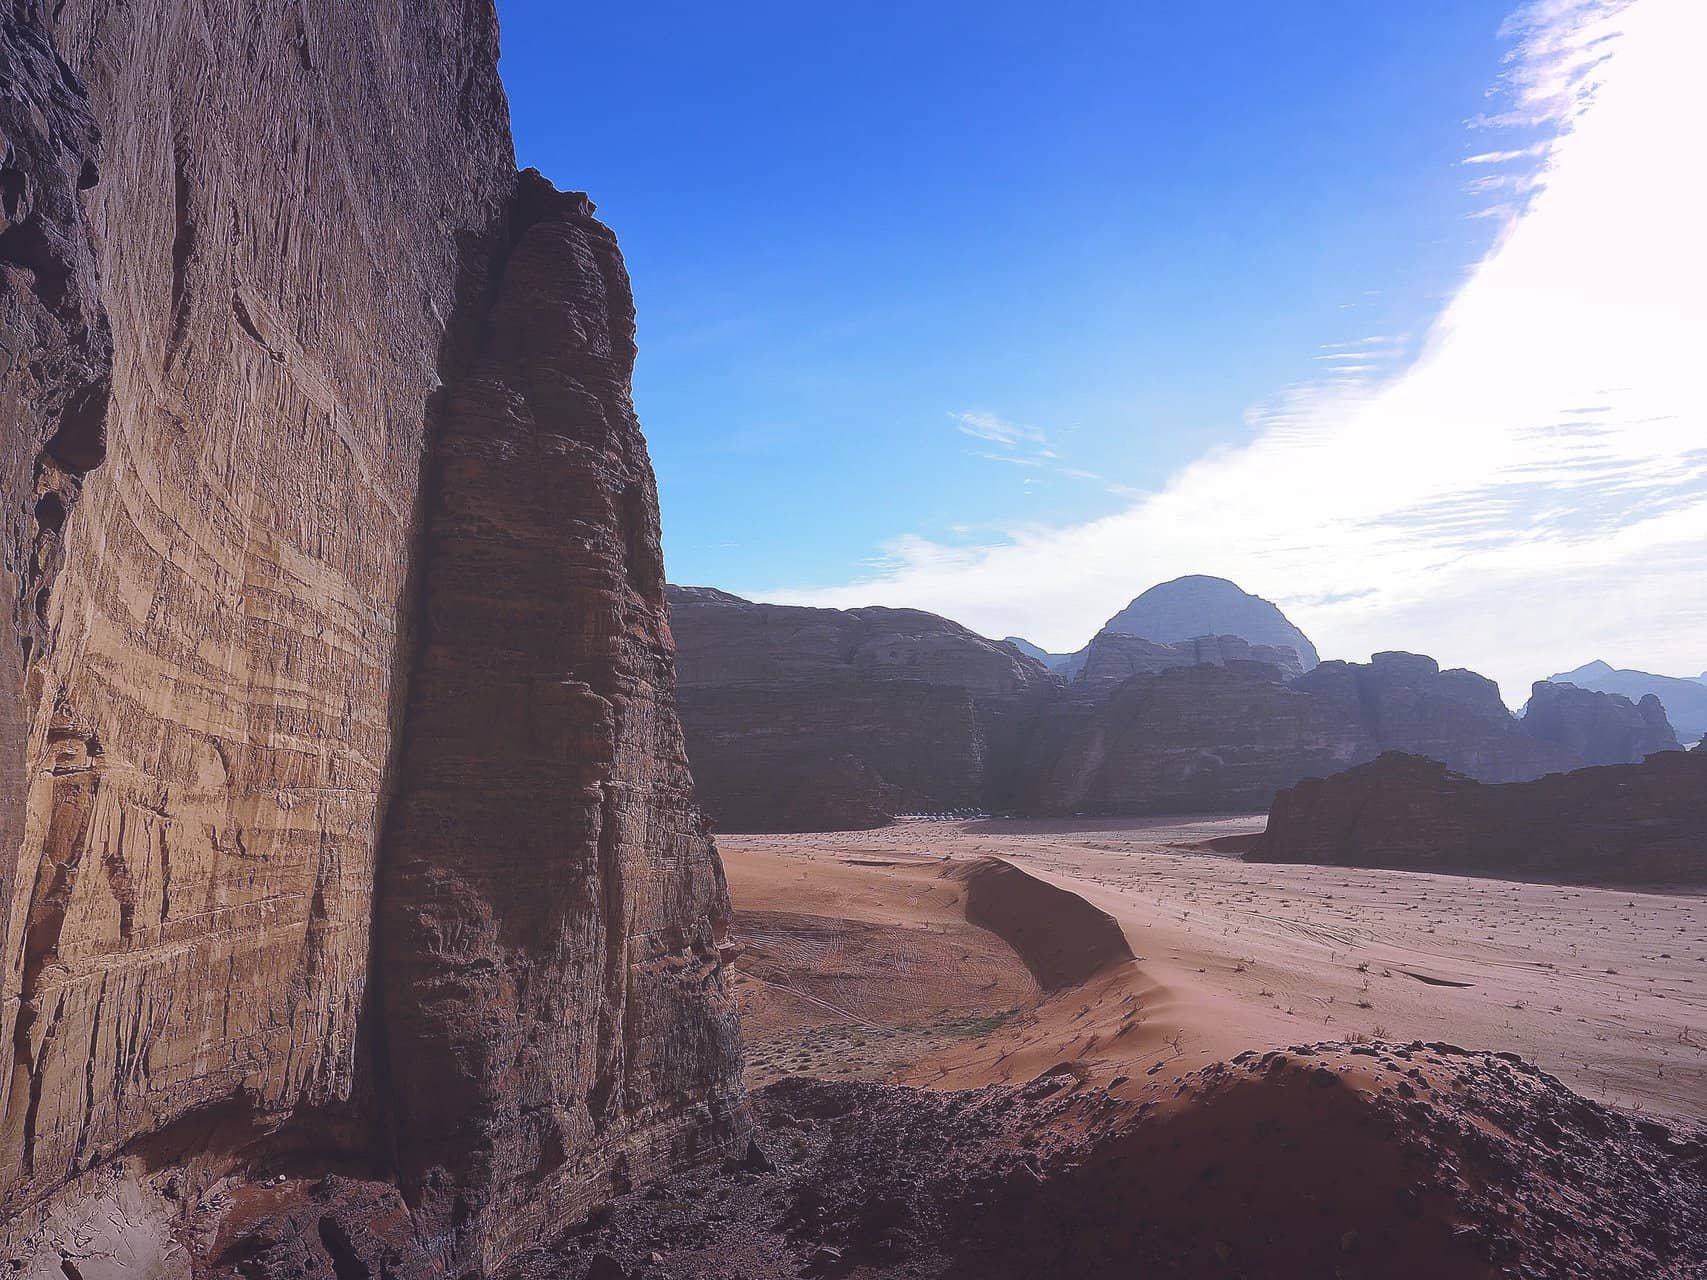 Can I Find a Climbing Partner in Wadi Rum? – Backcountry Nomad: An